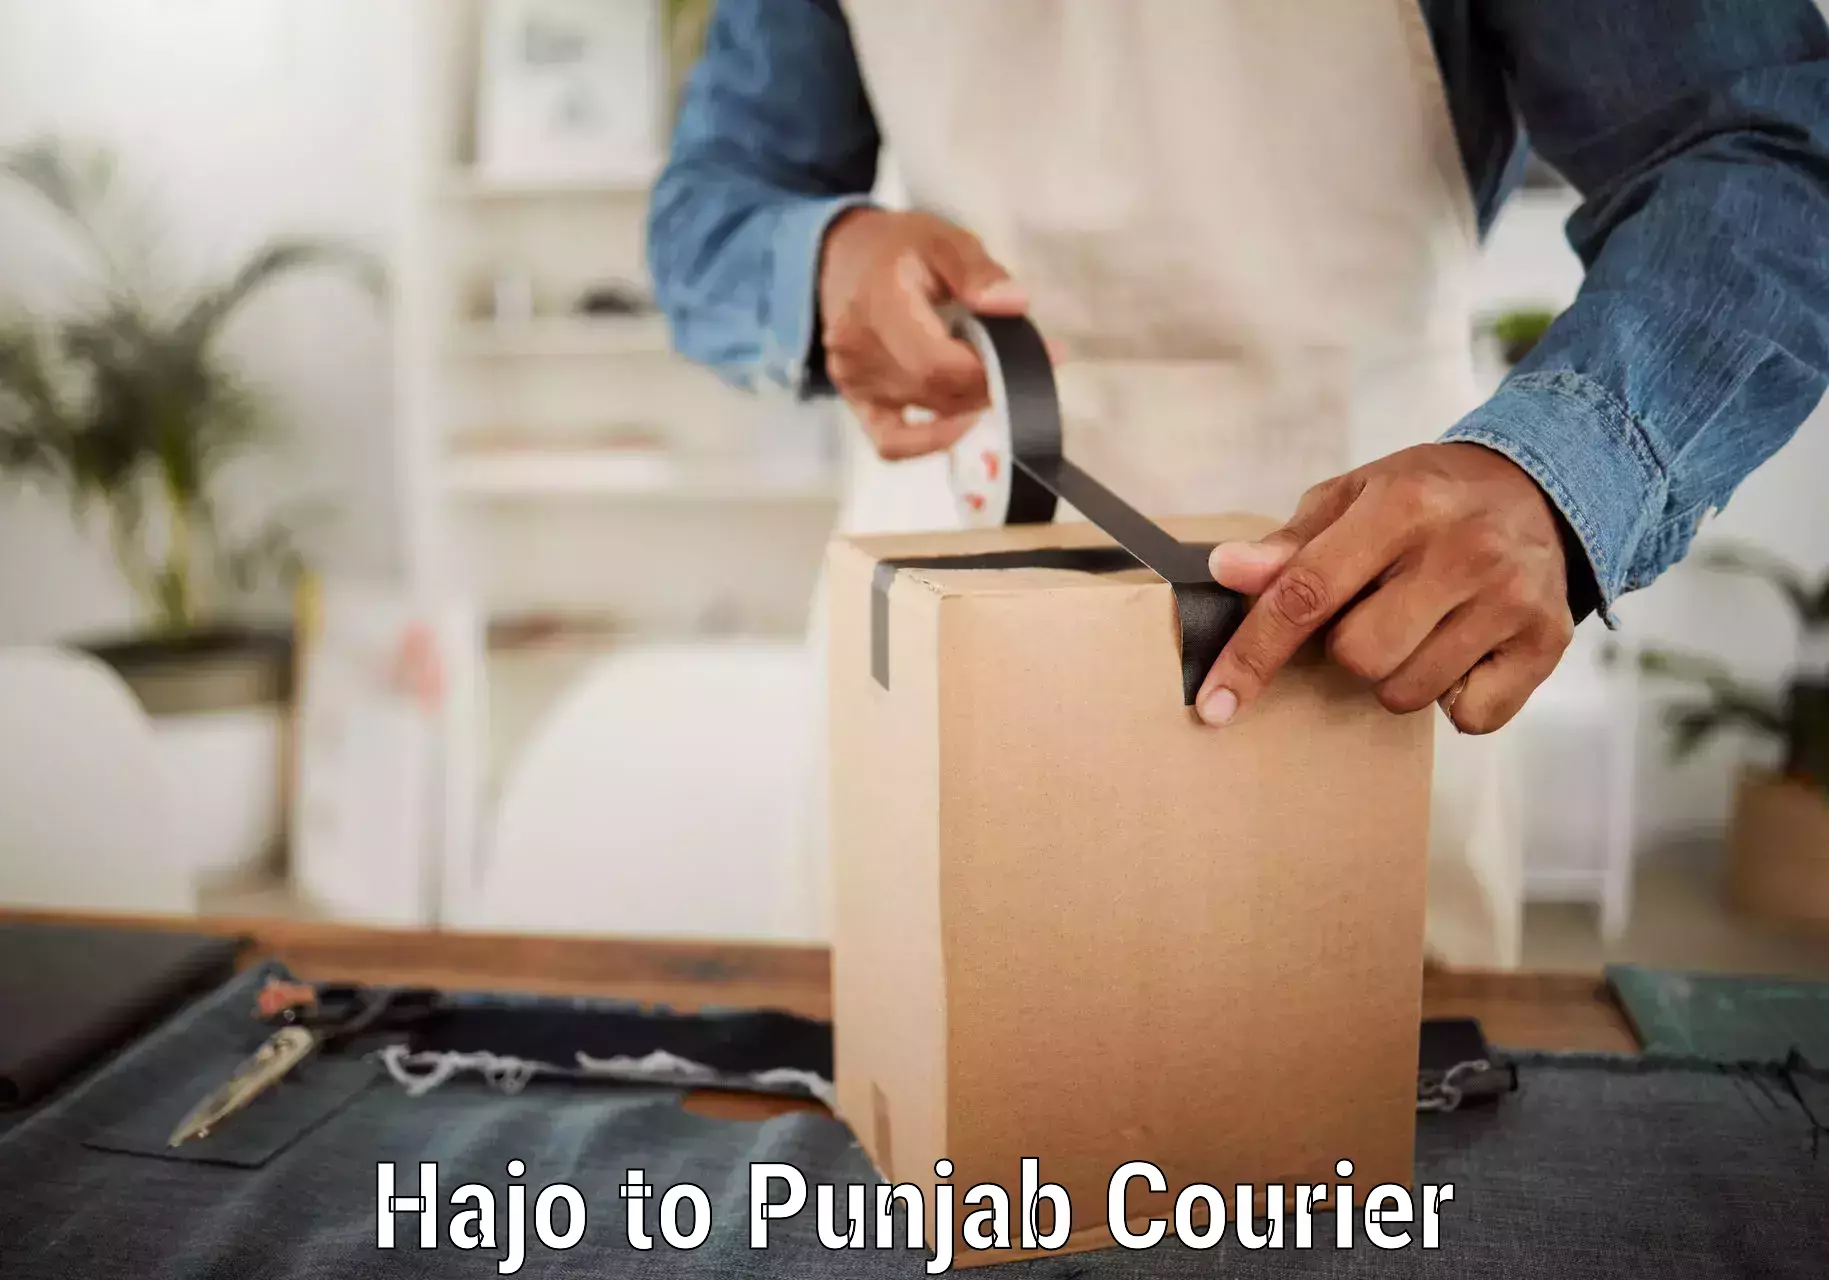 24-hour courier services Hajo to Punjab